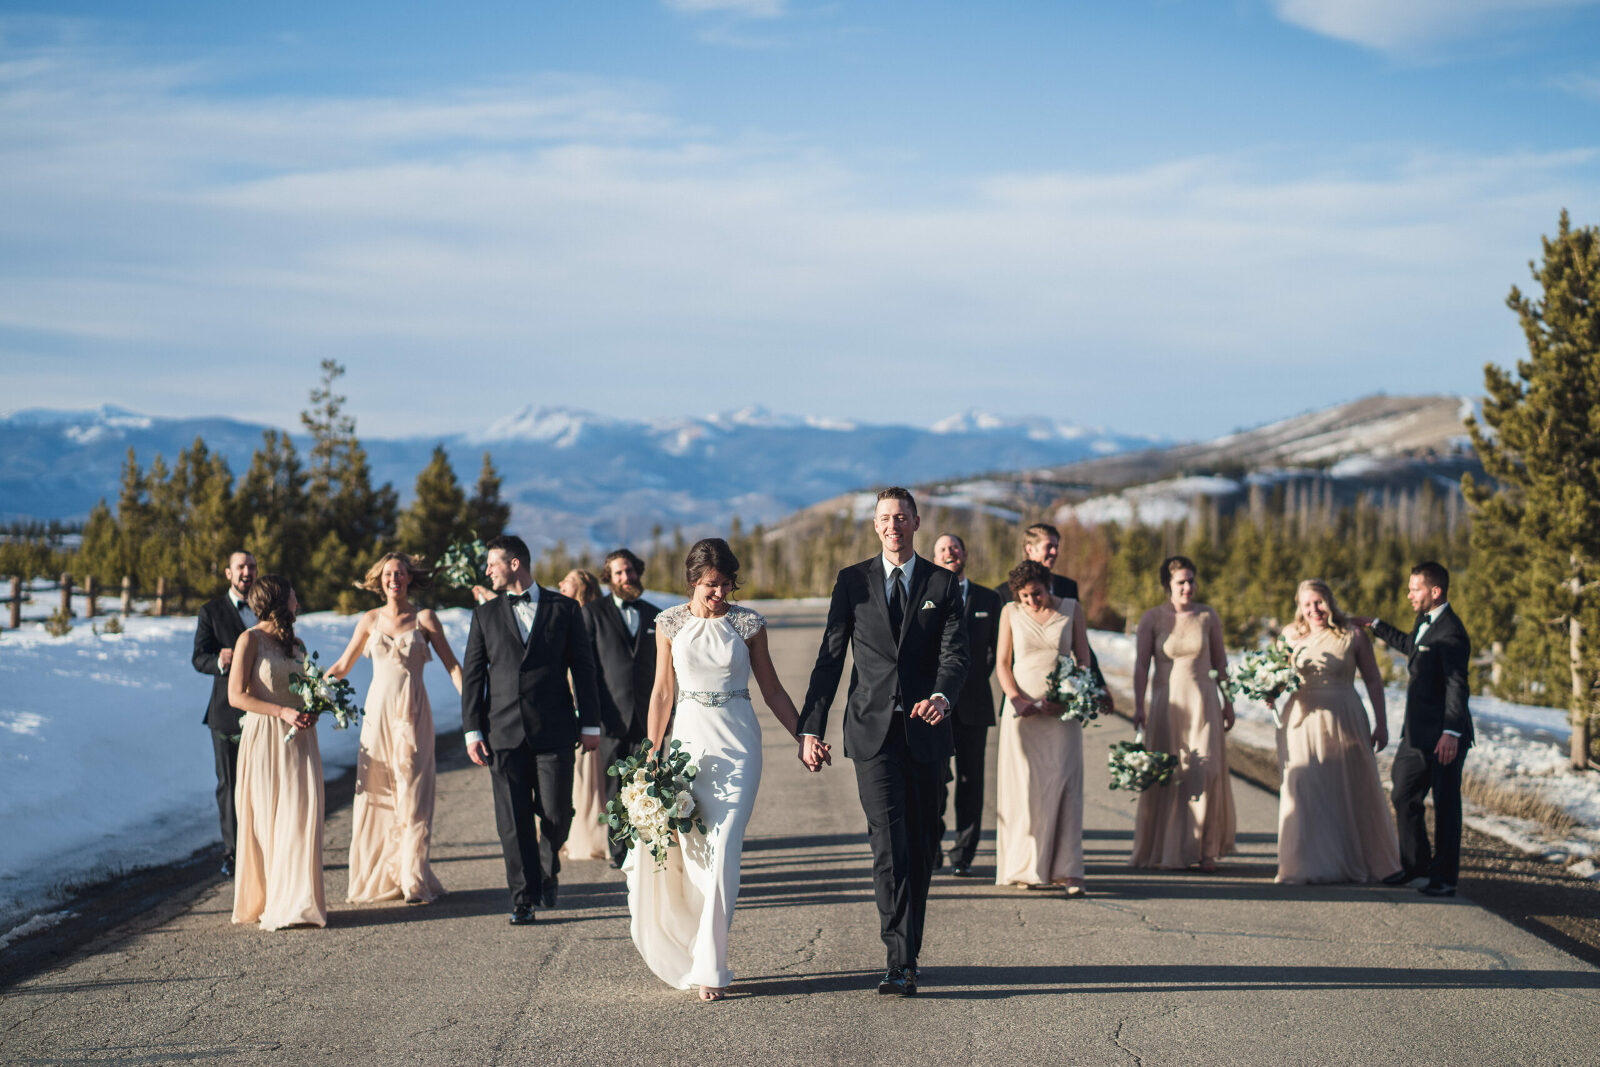 wedding party walking together on street in the snowy mountains of Colorado